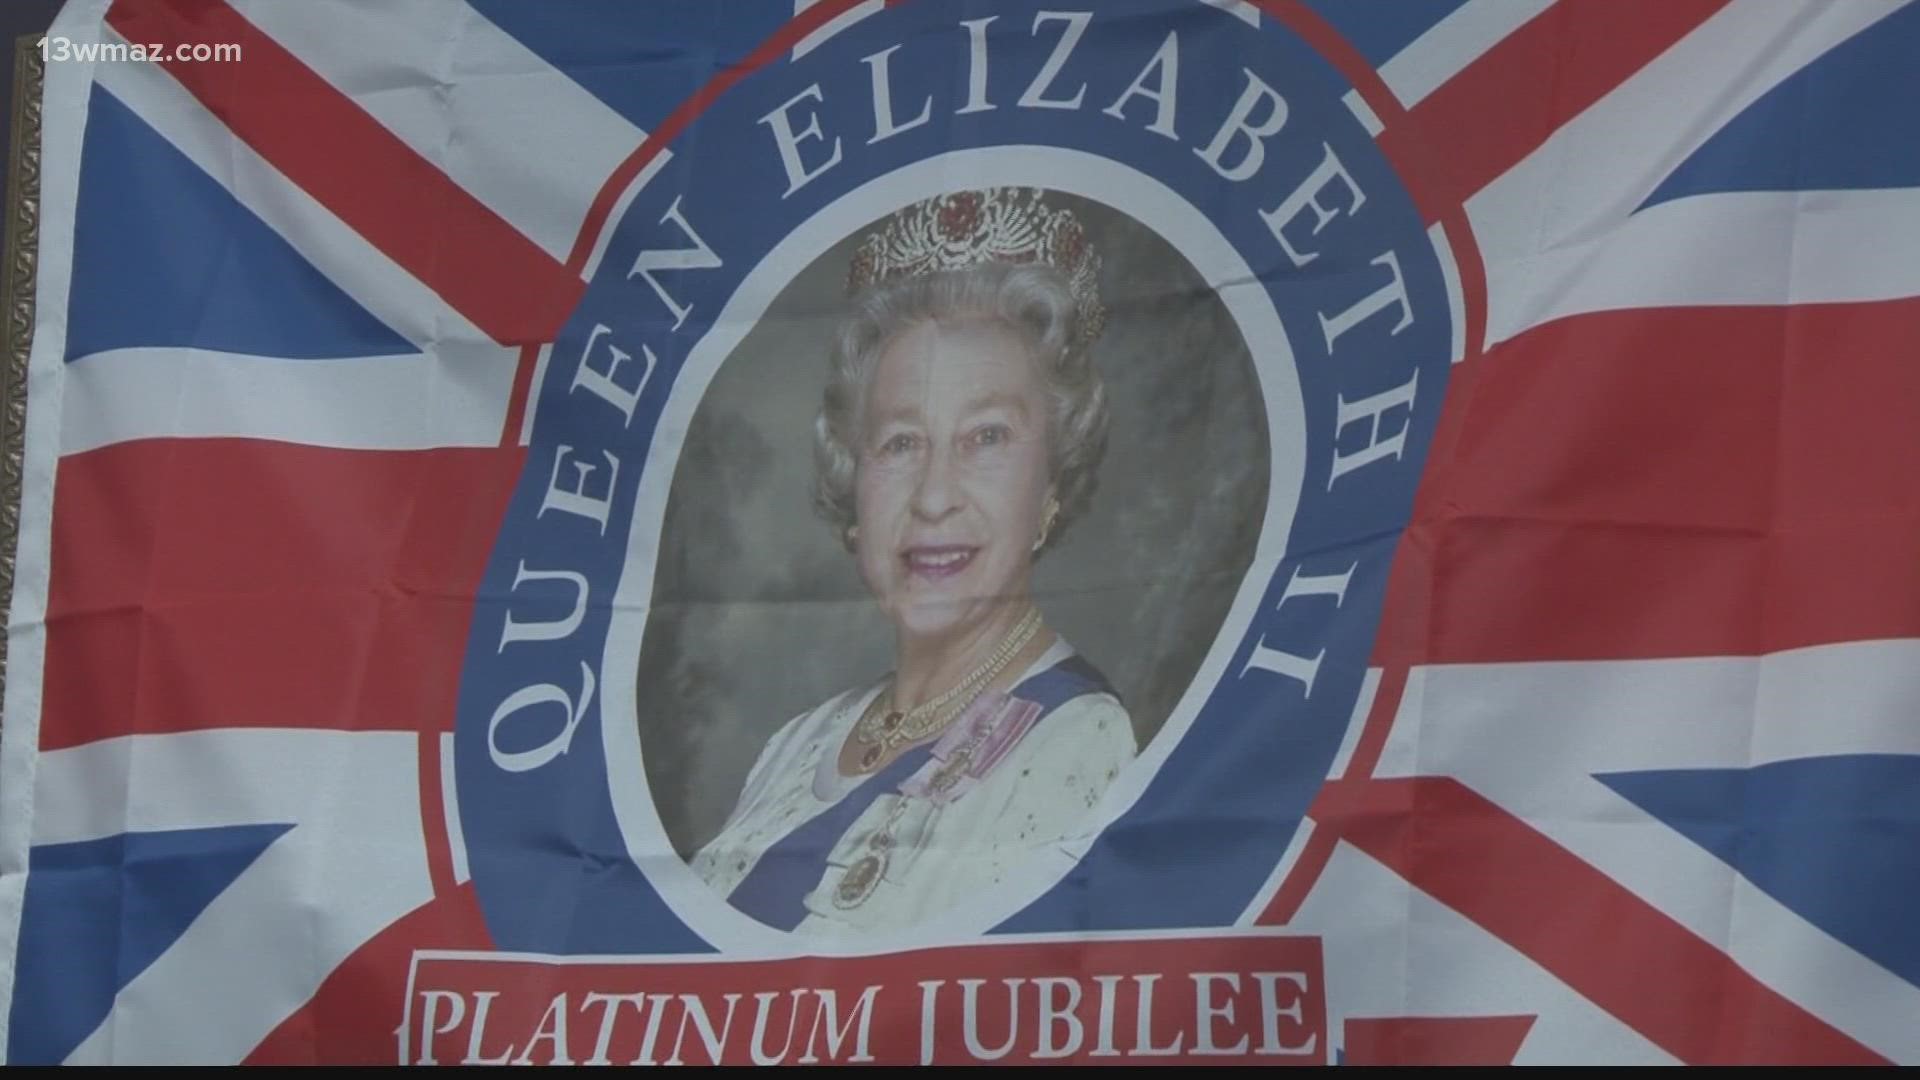 The day Queen Elizabeth died, the owner of the British Pantry and Tea Room, Jan Francis, shut down her business.